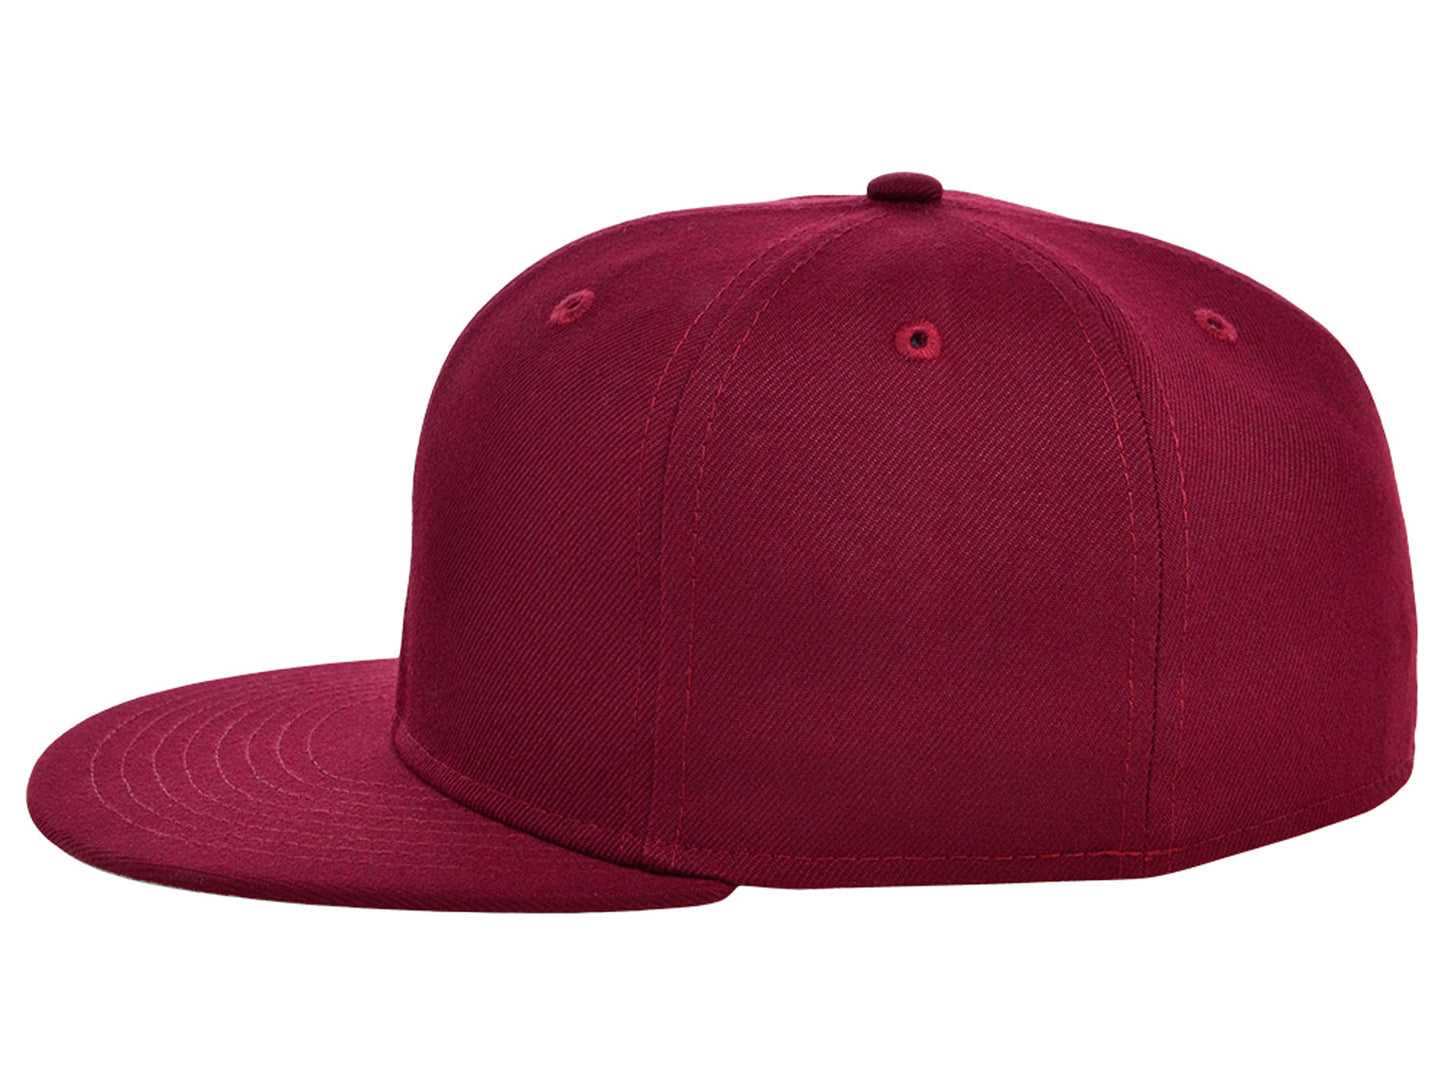 Crowns by Lids Full Court Fitted Cap - Maroon